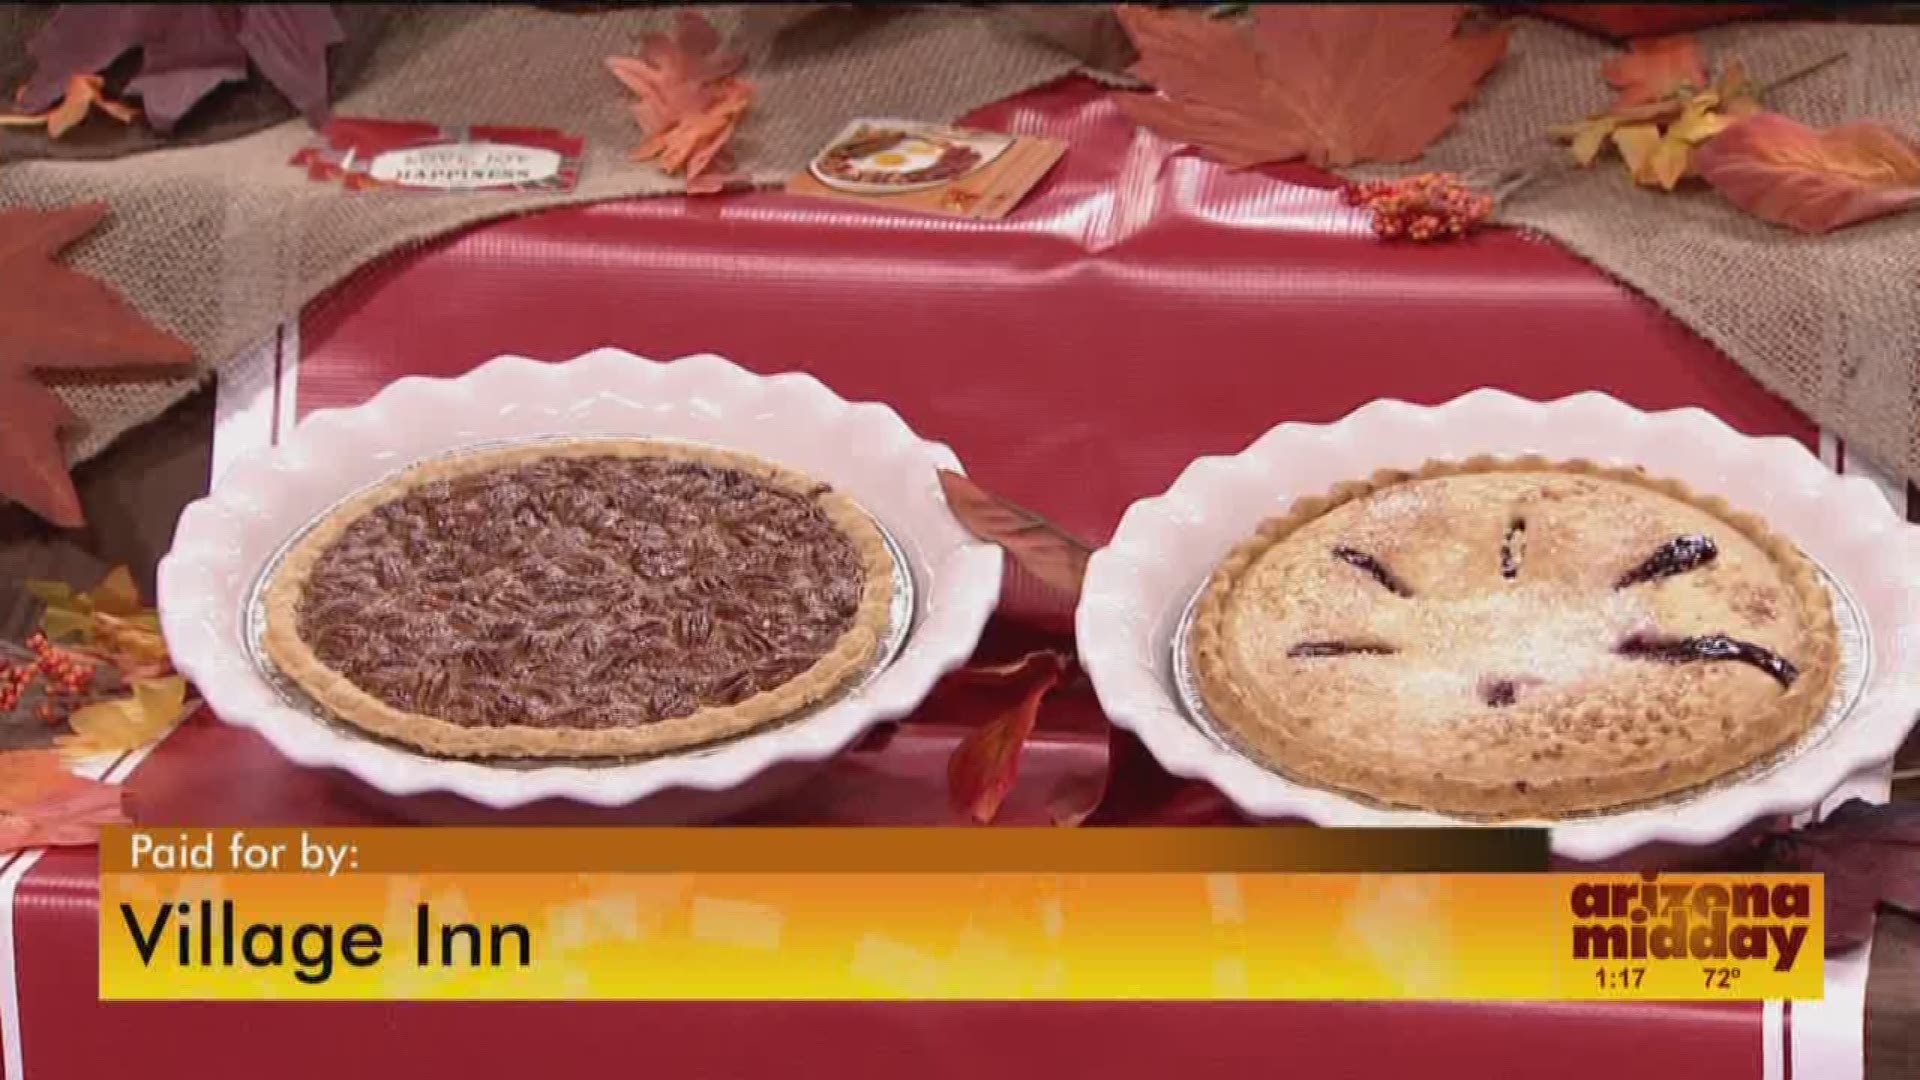 Order your Thanksgiving pies from Village Inn!